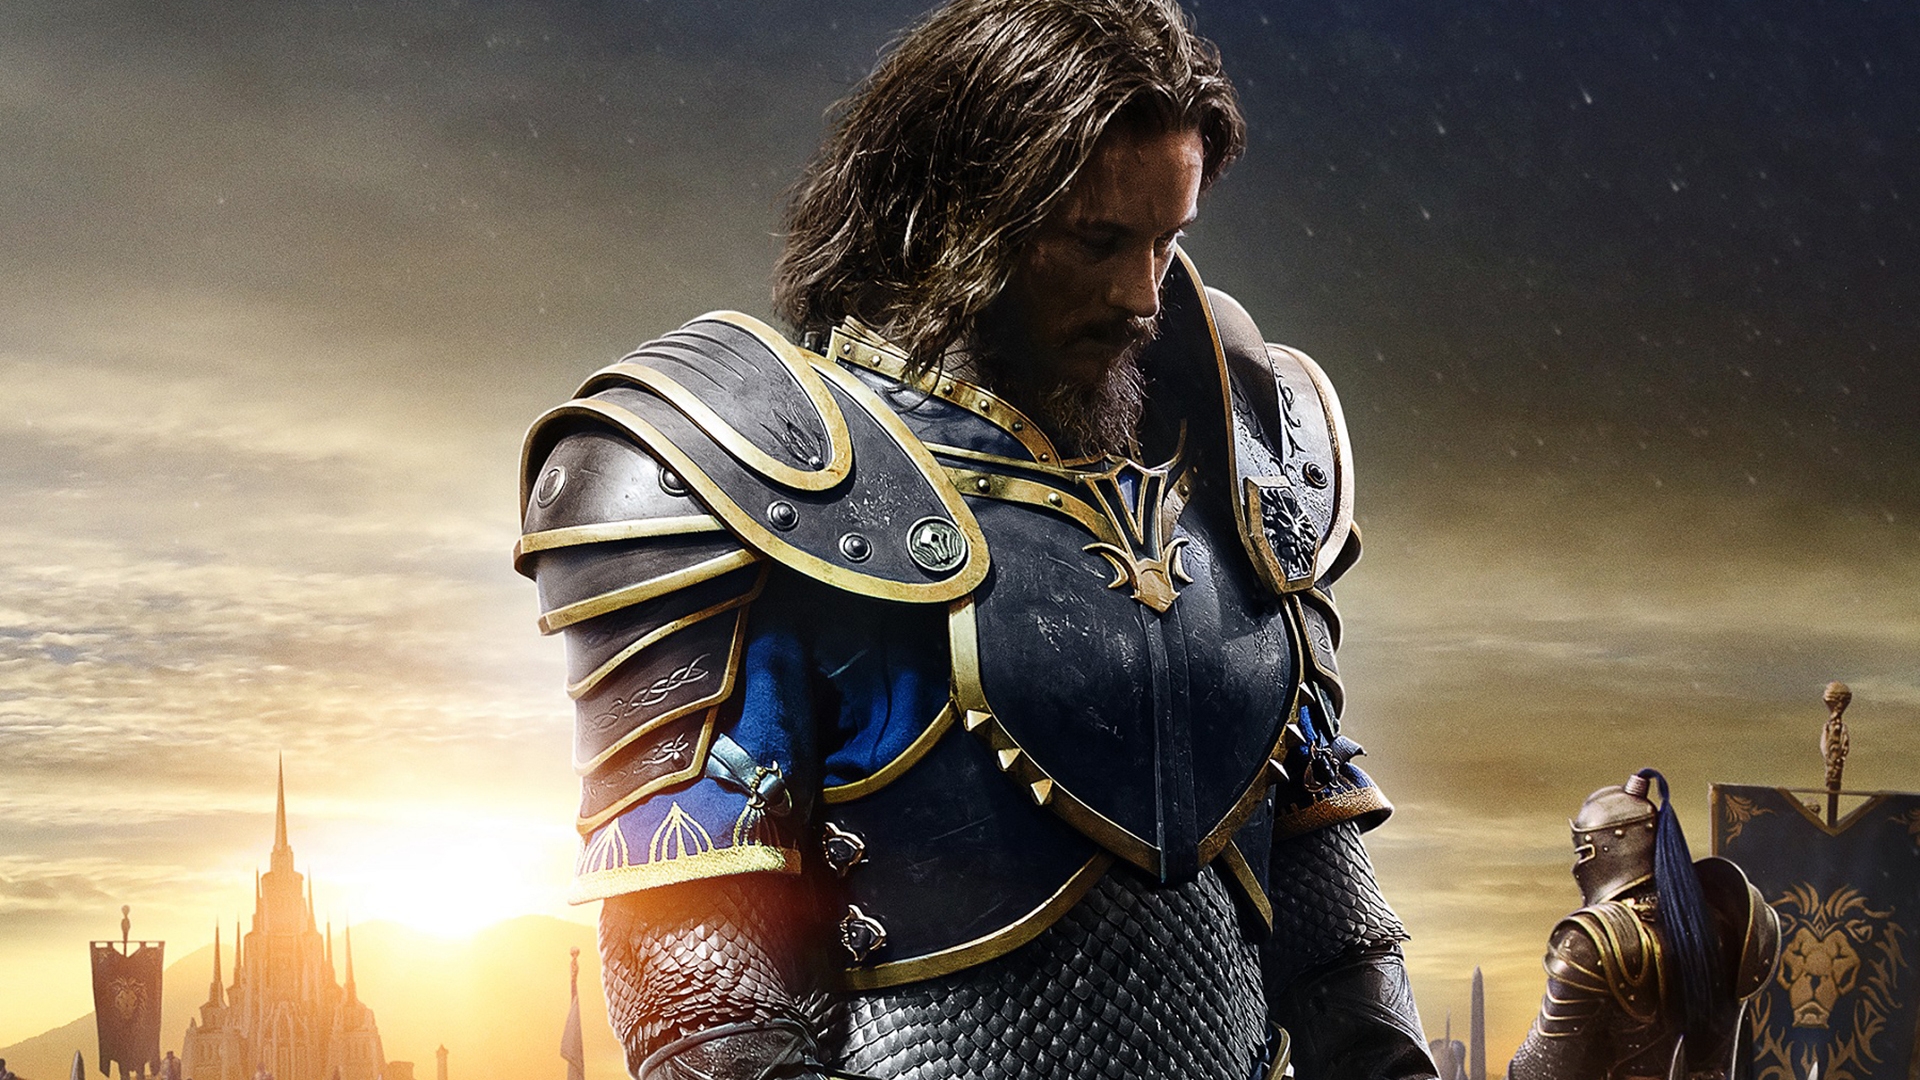 Warcraft Movie 2016 Sir Anduin Lothar for 1920 x 1080 HDTV 1080p resolution